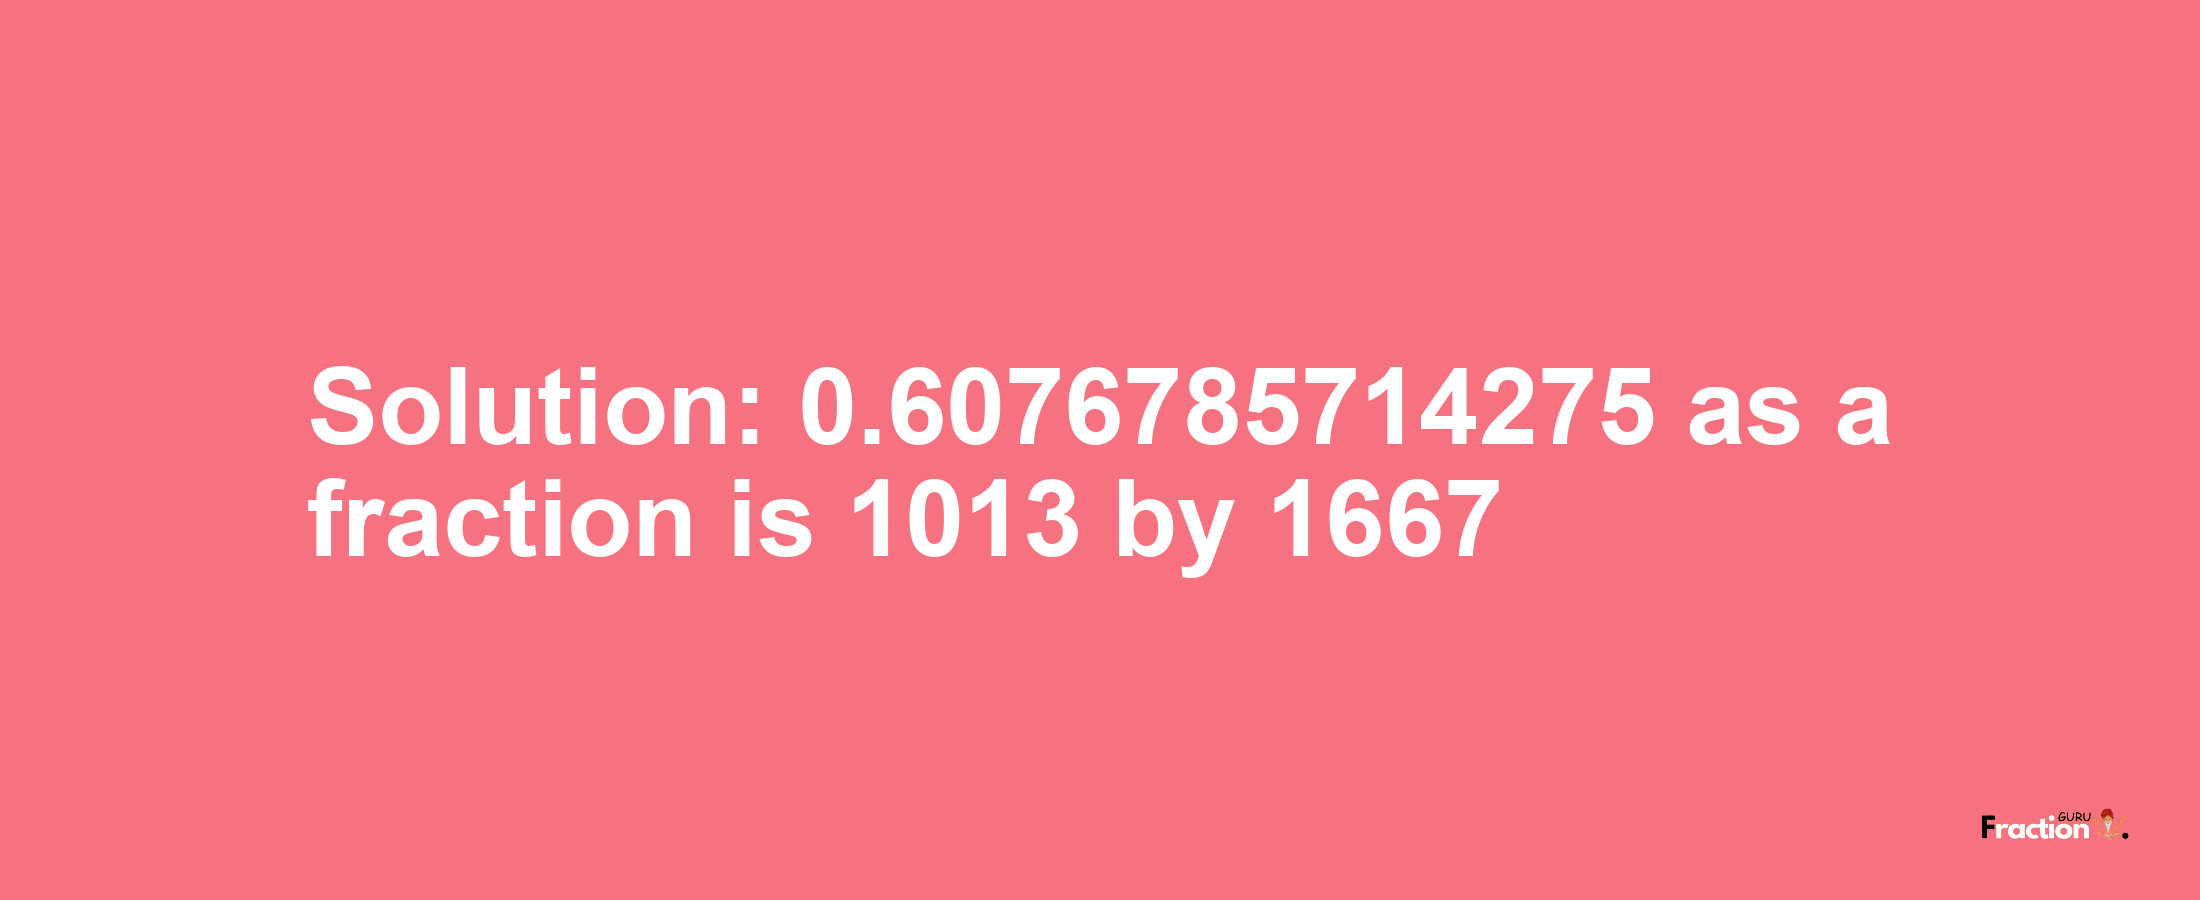 Solution:0.6076785714275 as a fraction is 1013/1667